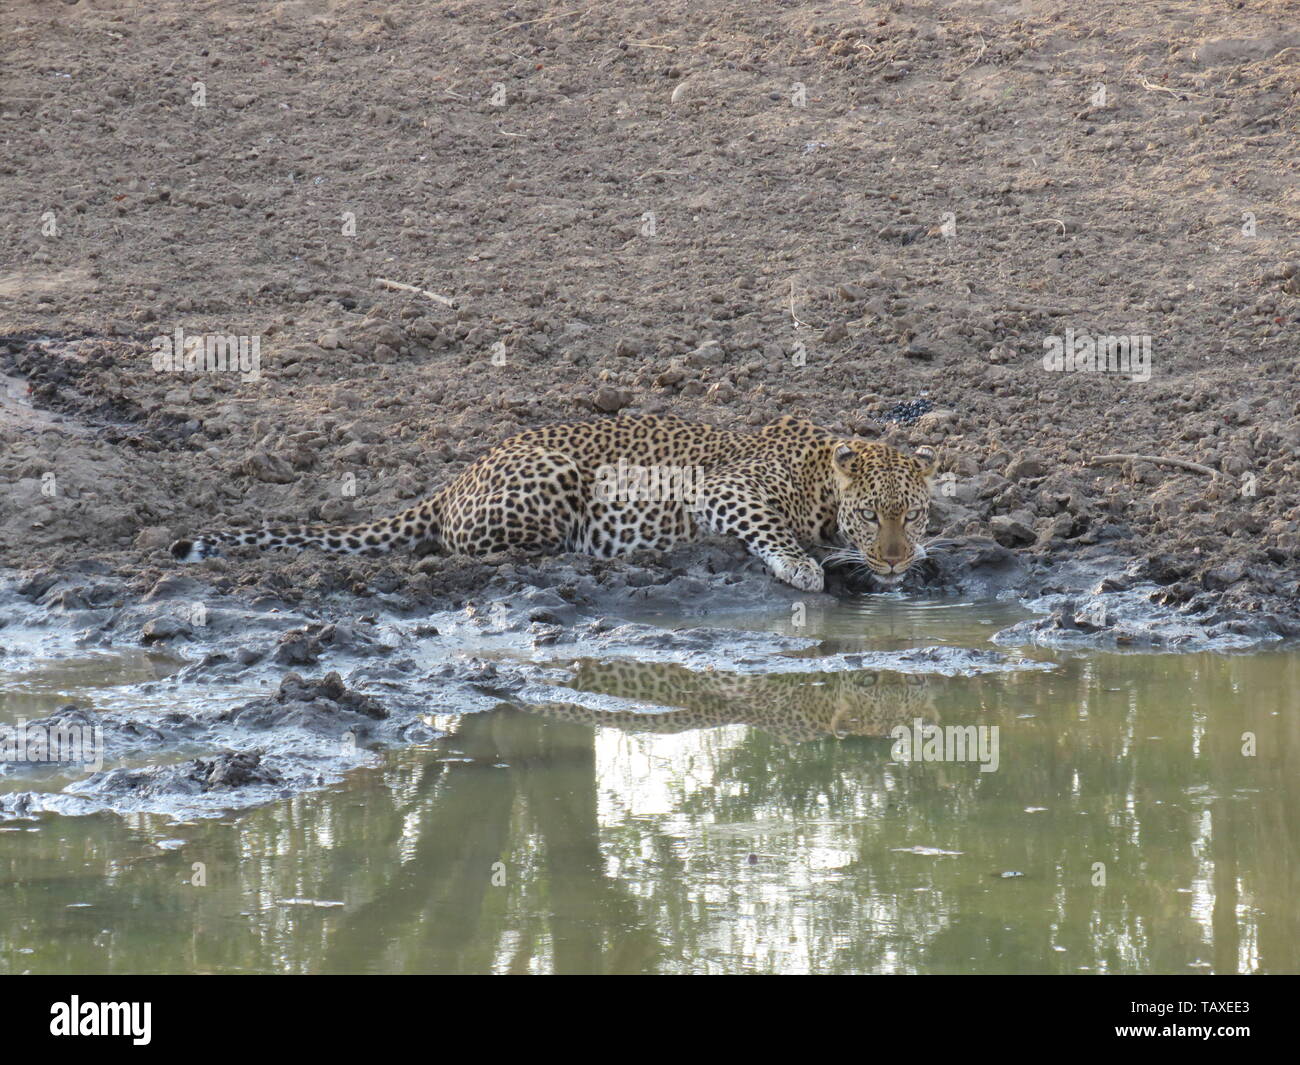 A beautiful leopard looking menacingly at the camera whilst drinking from the waterhole complete with reflection, Karongwe Game Reserve, South Africa. Stock Photo